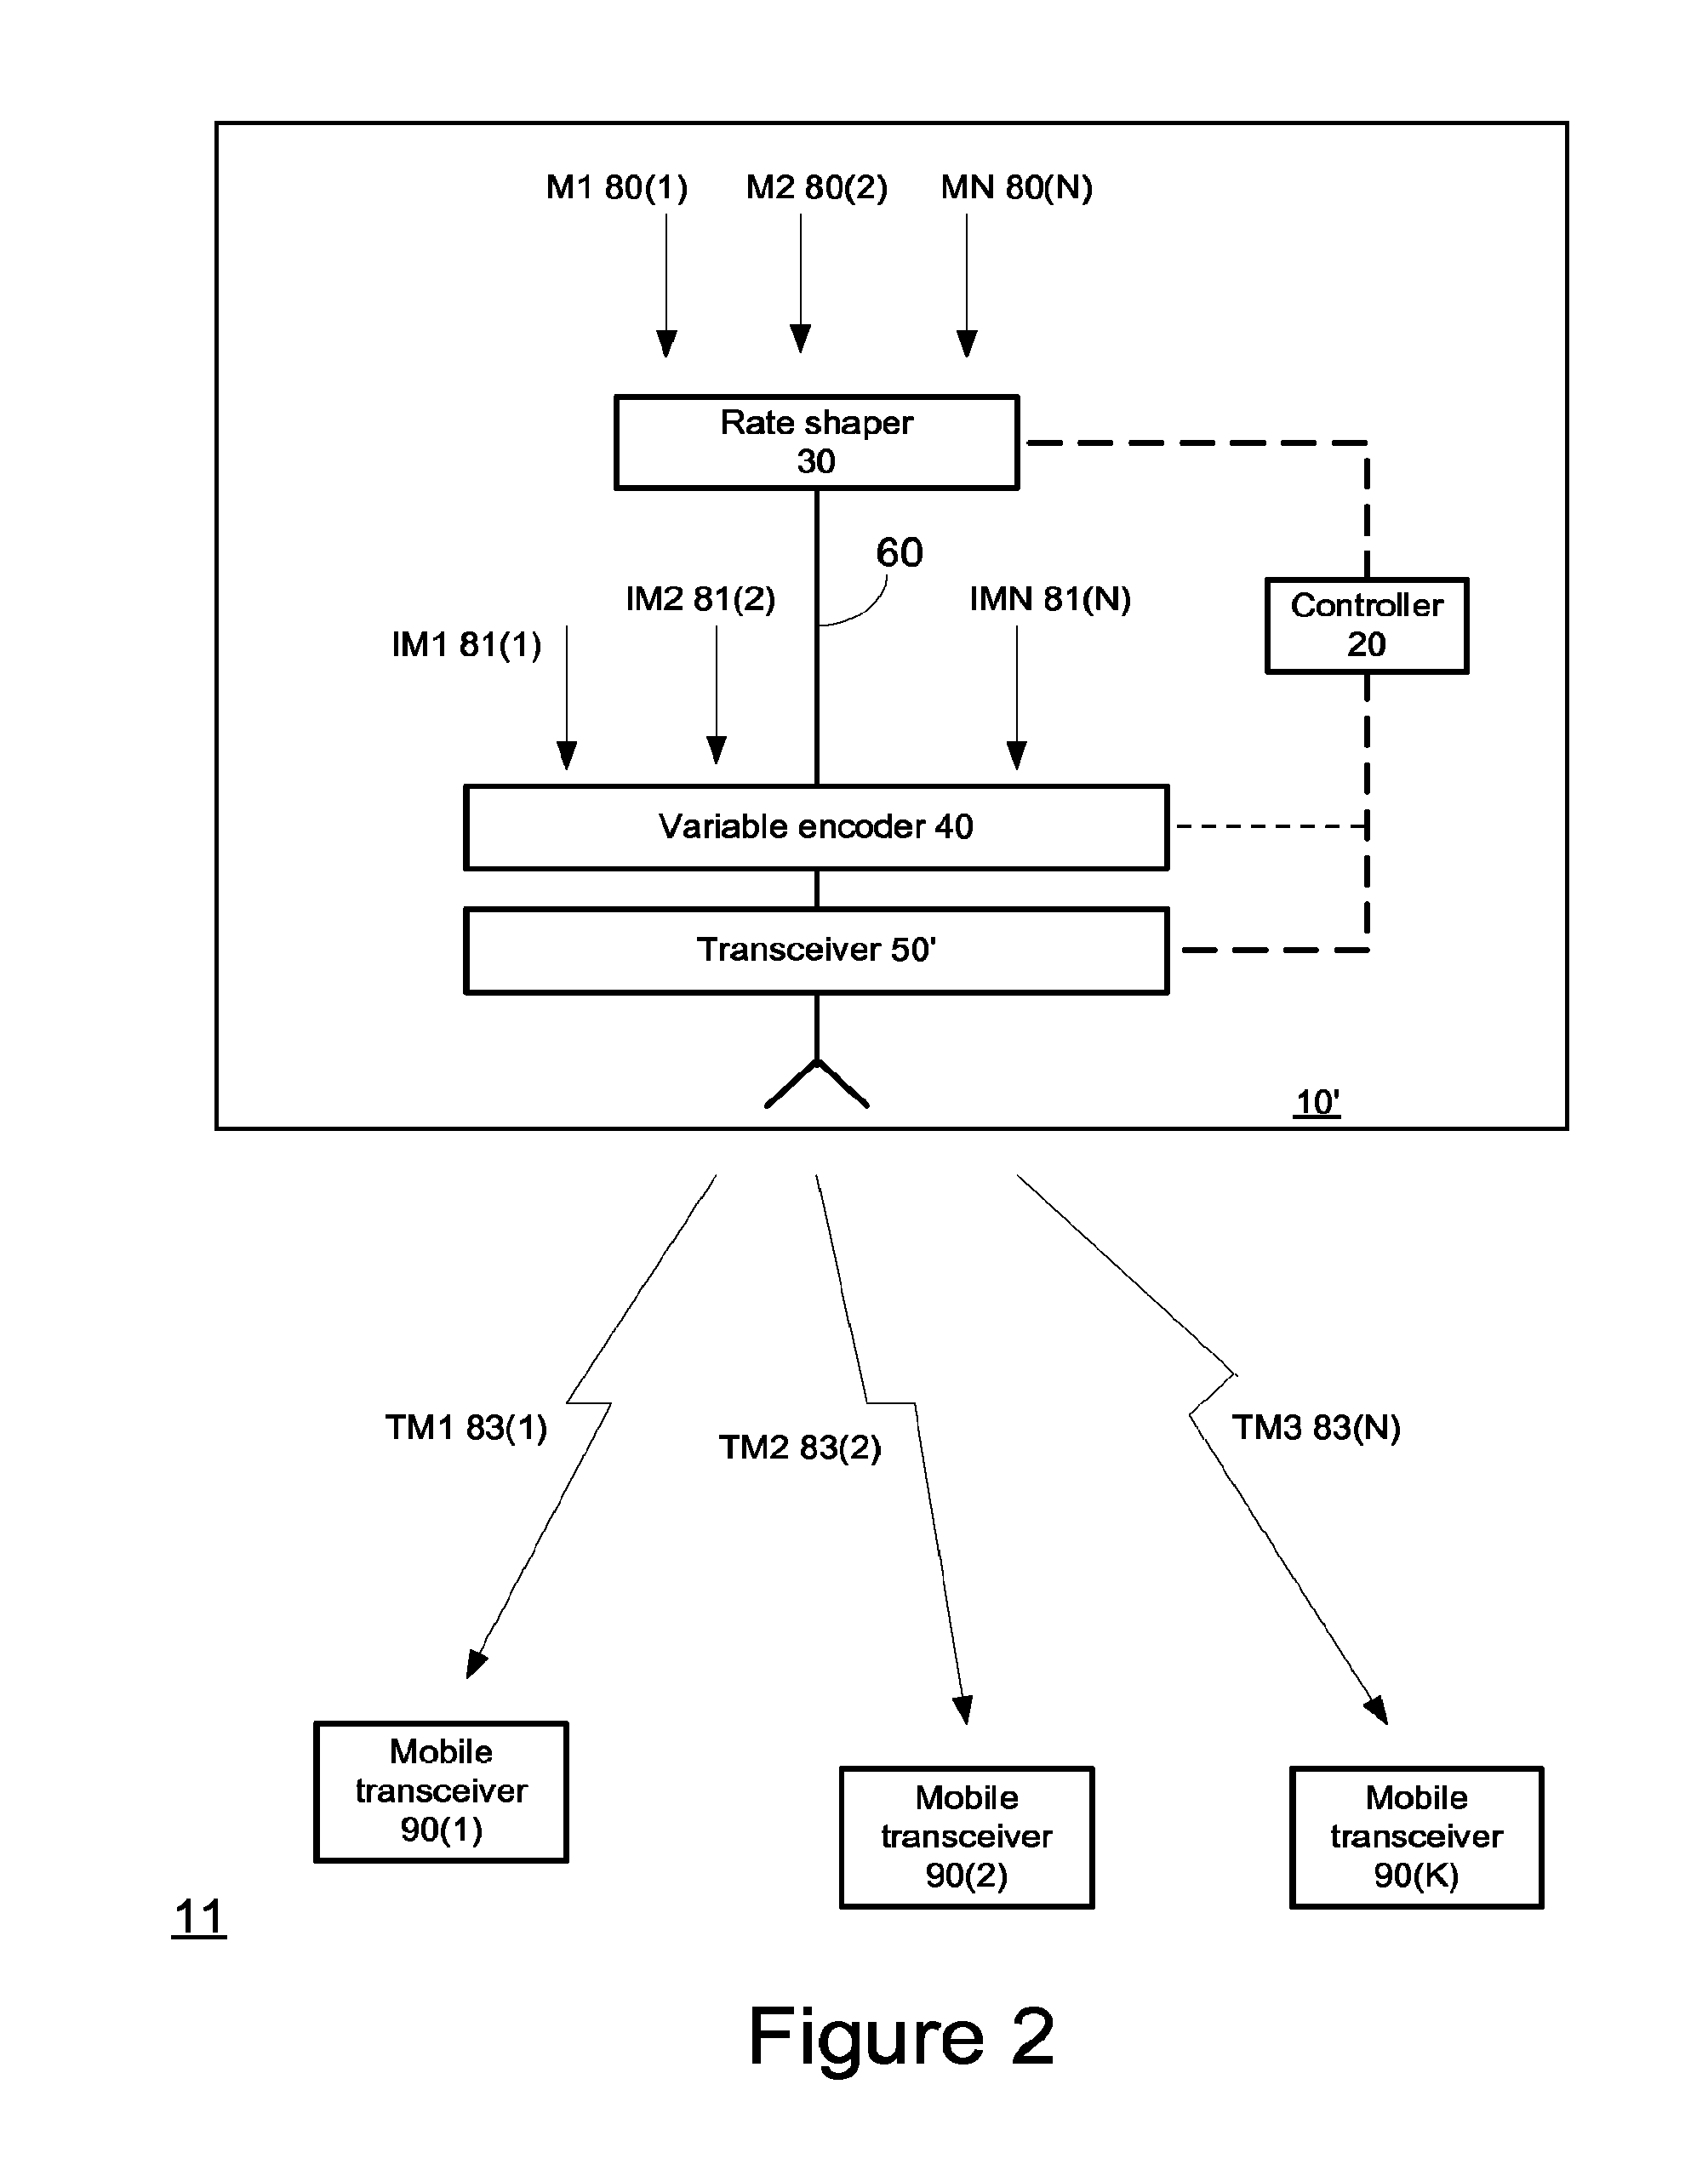 Method and system for rate-shaping and transmitting media streams